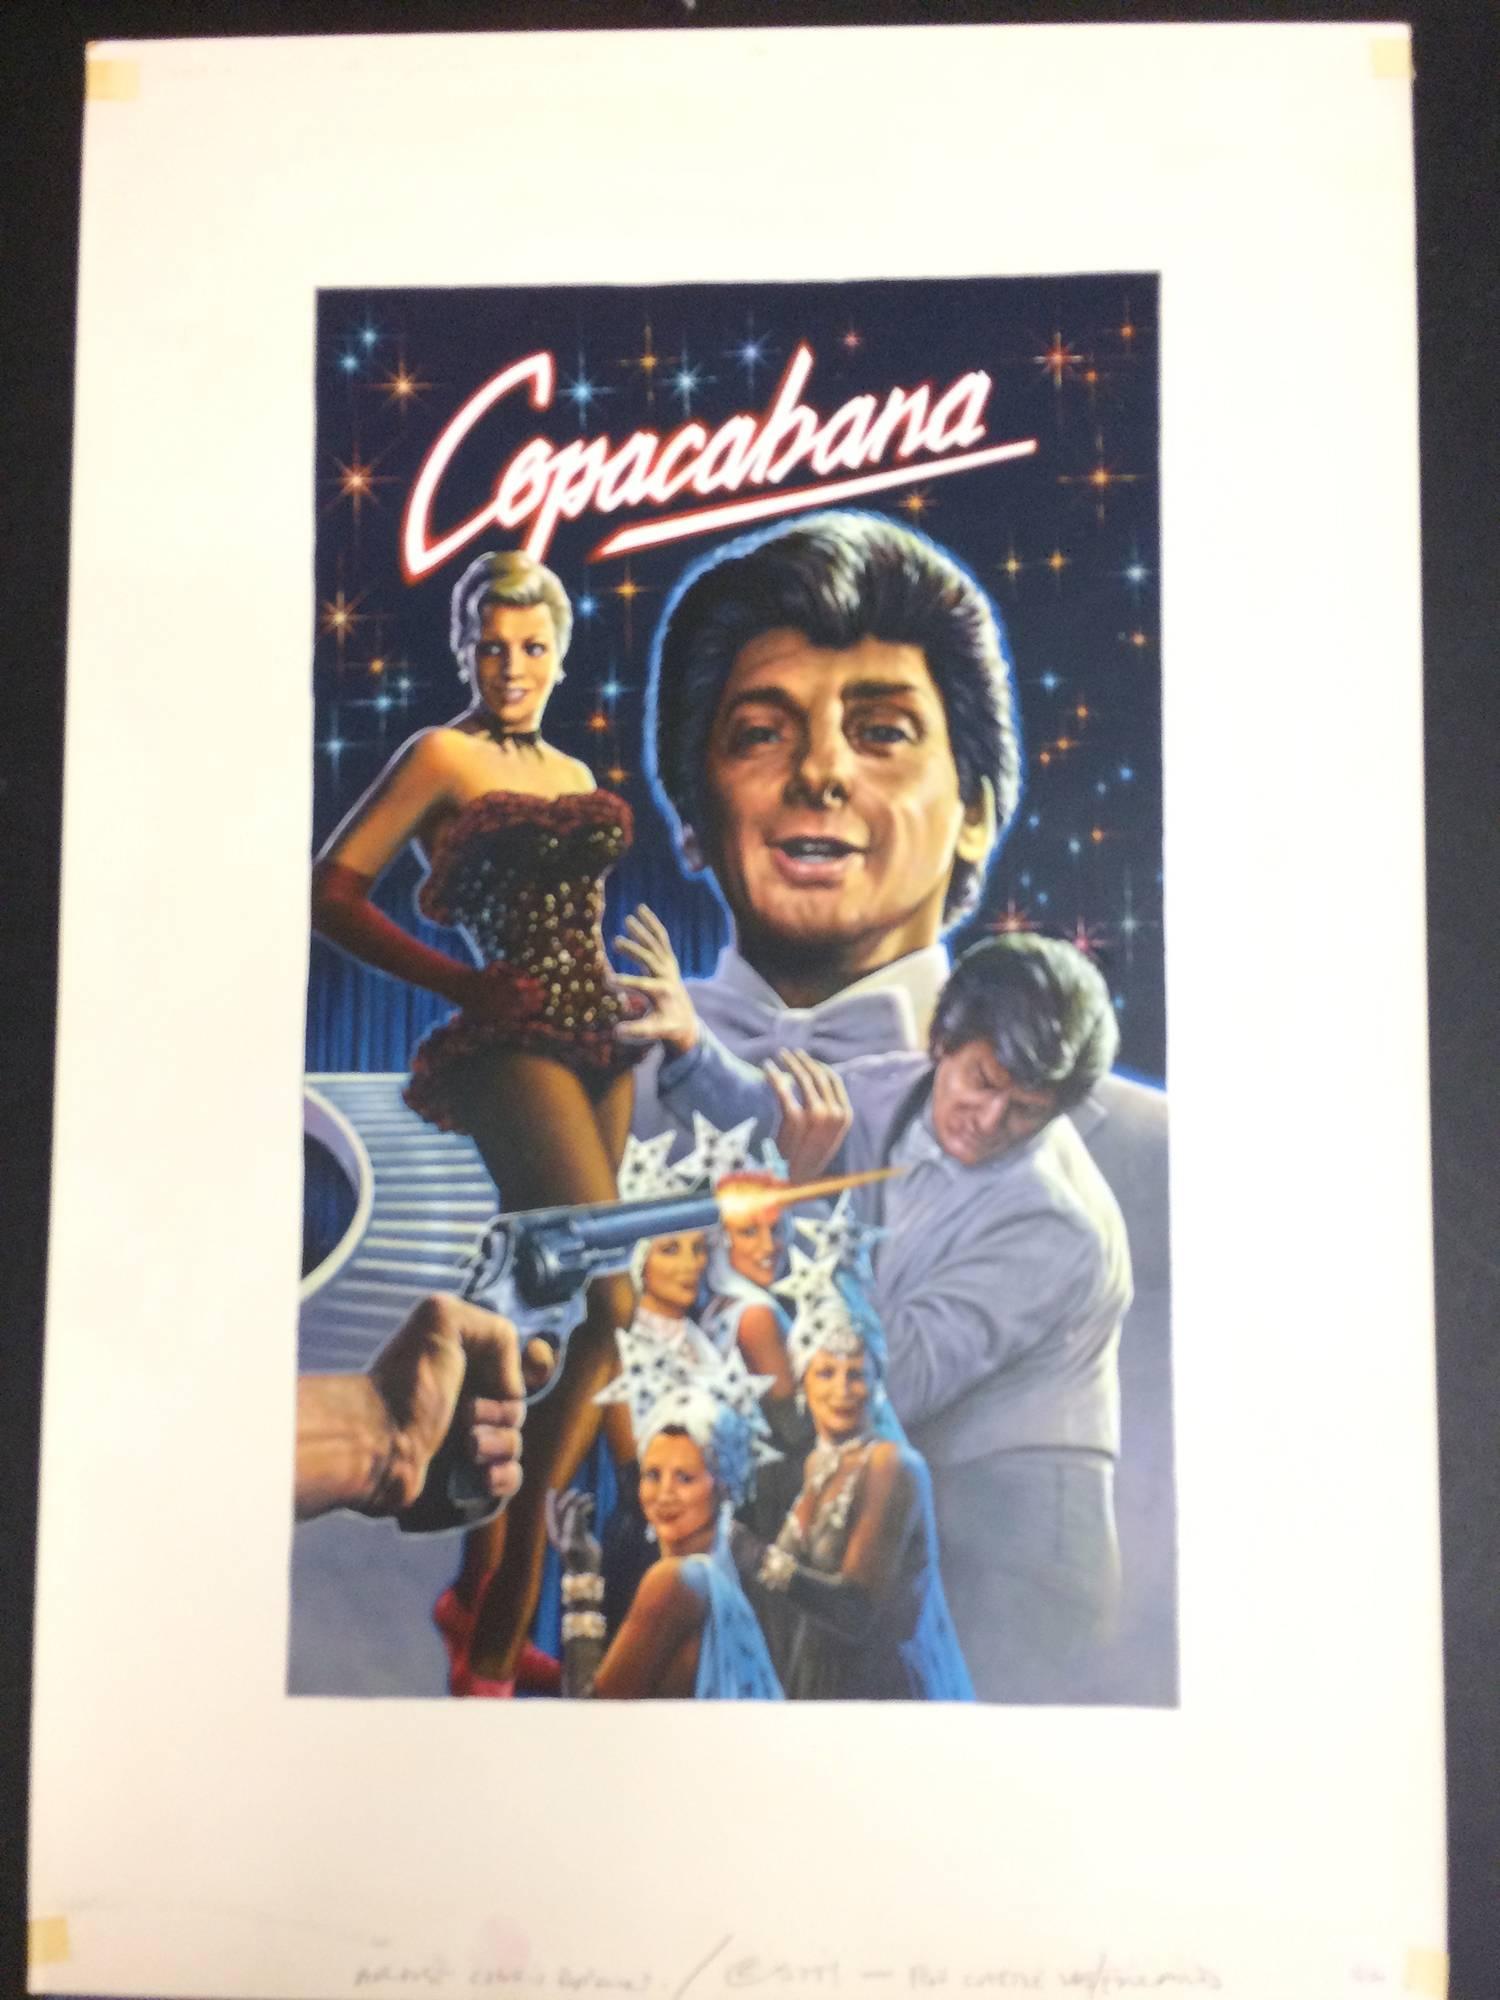 BARRY MANILOW, THE ORIGINAL PAINTING 1985 FOR THE COPACABANA FILM VHS COVER - Art by Chris Brown